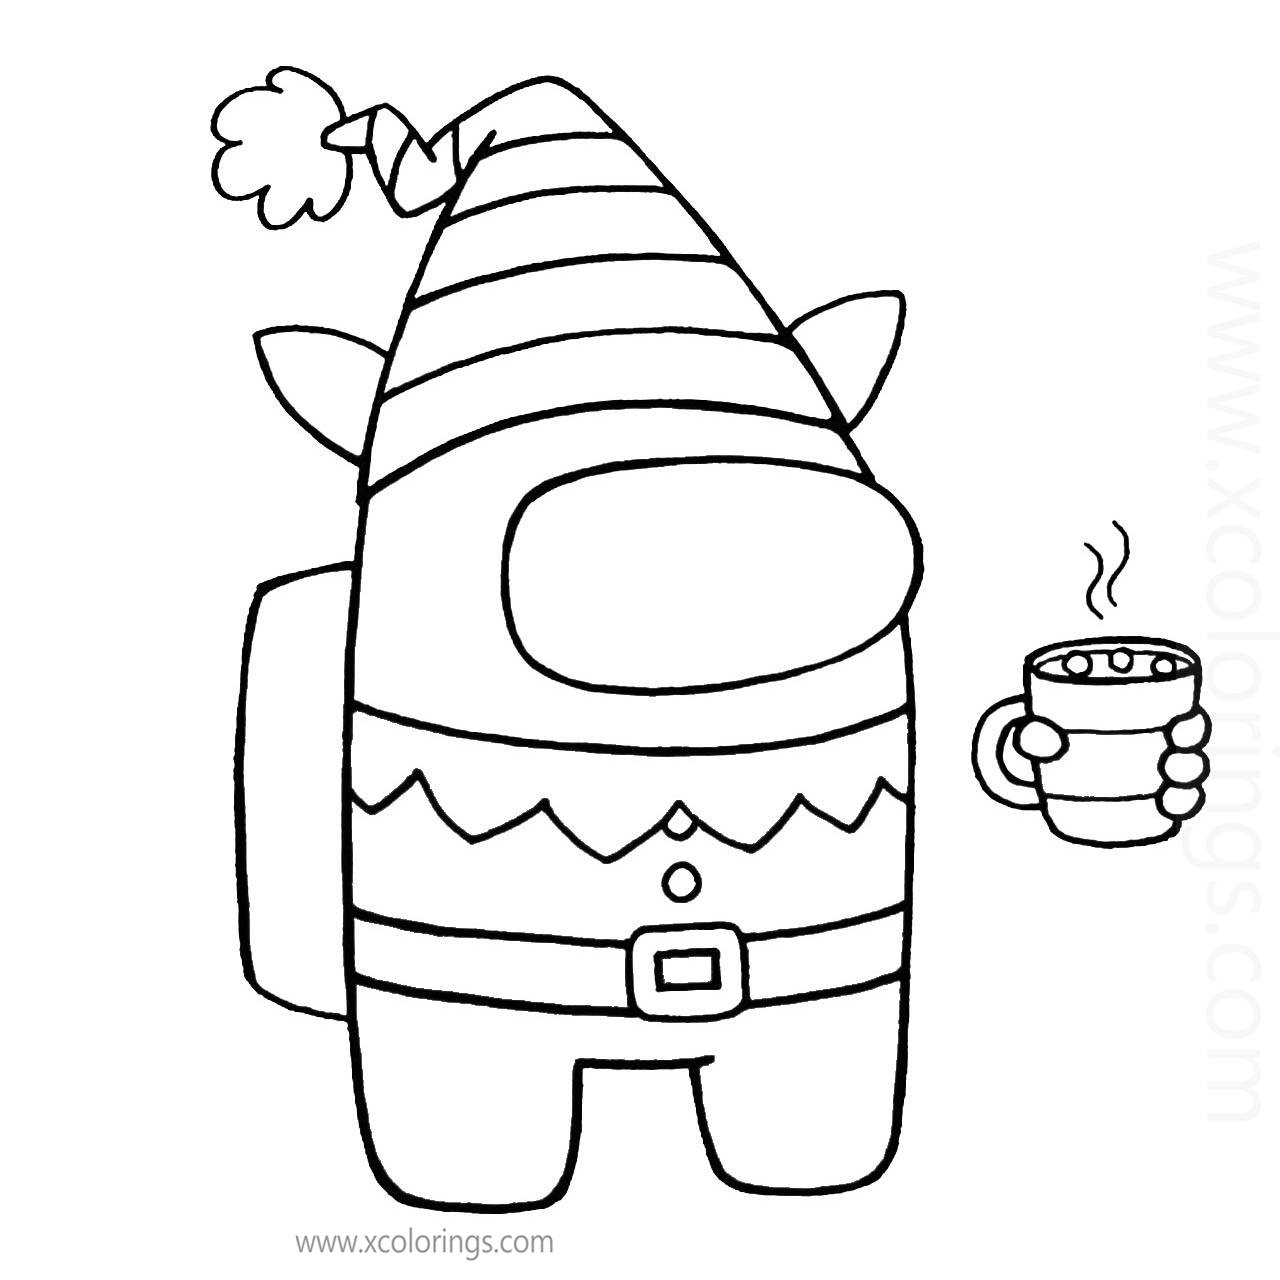 Free Among Us Coloring Pages Christmas Elf Skin and Hat printable